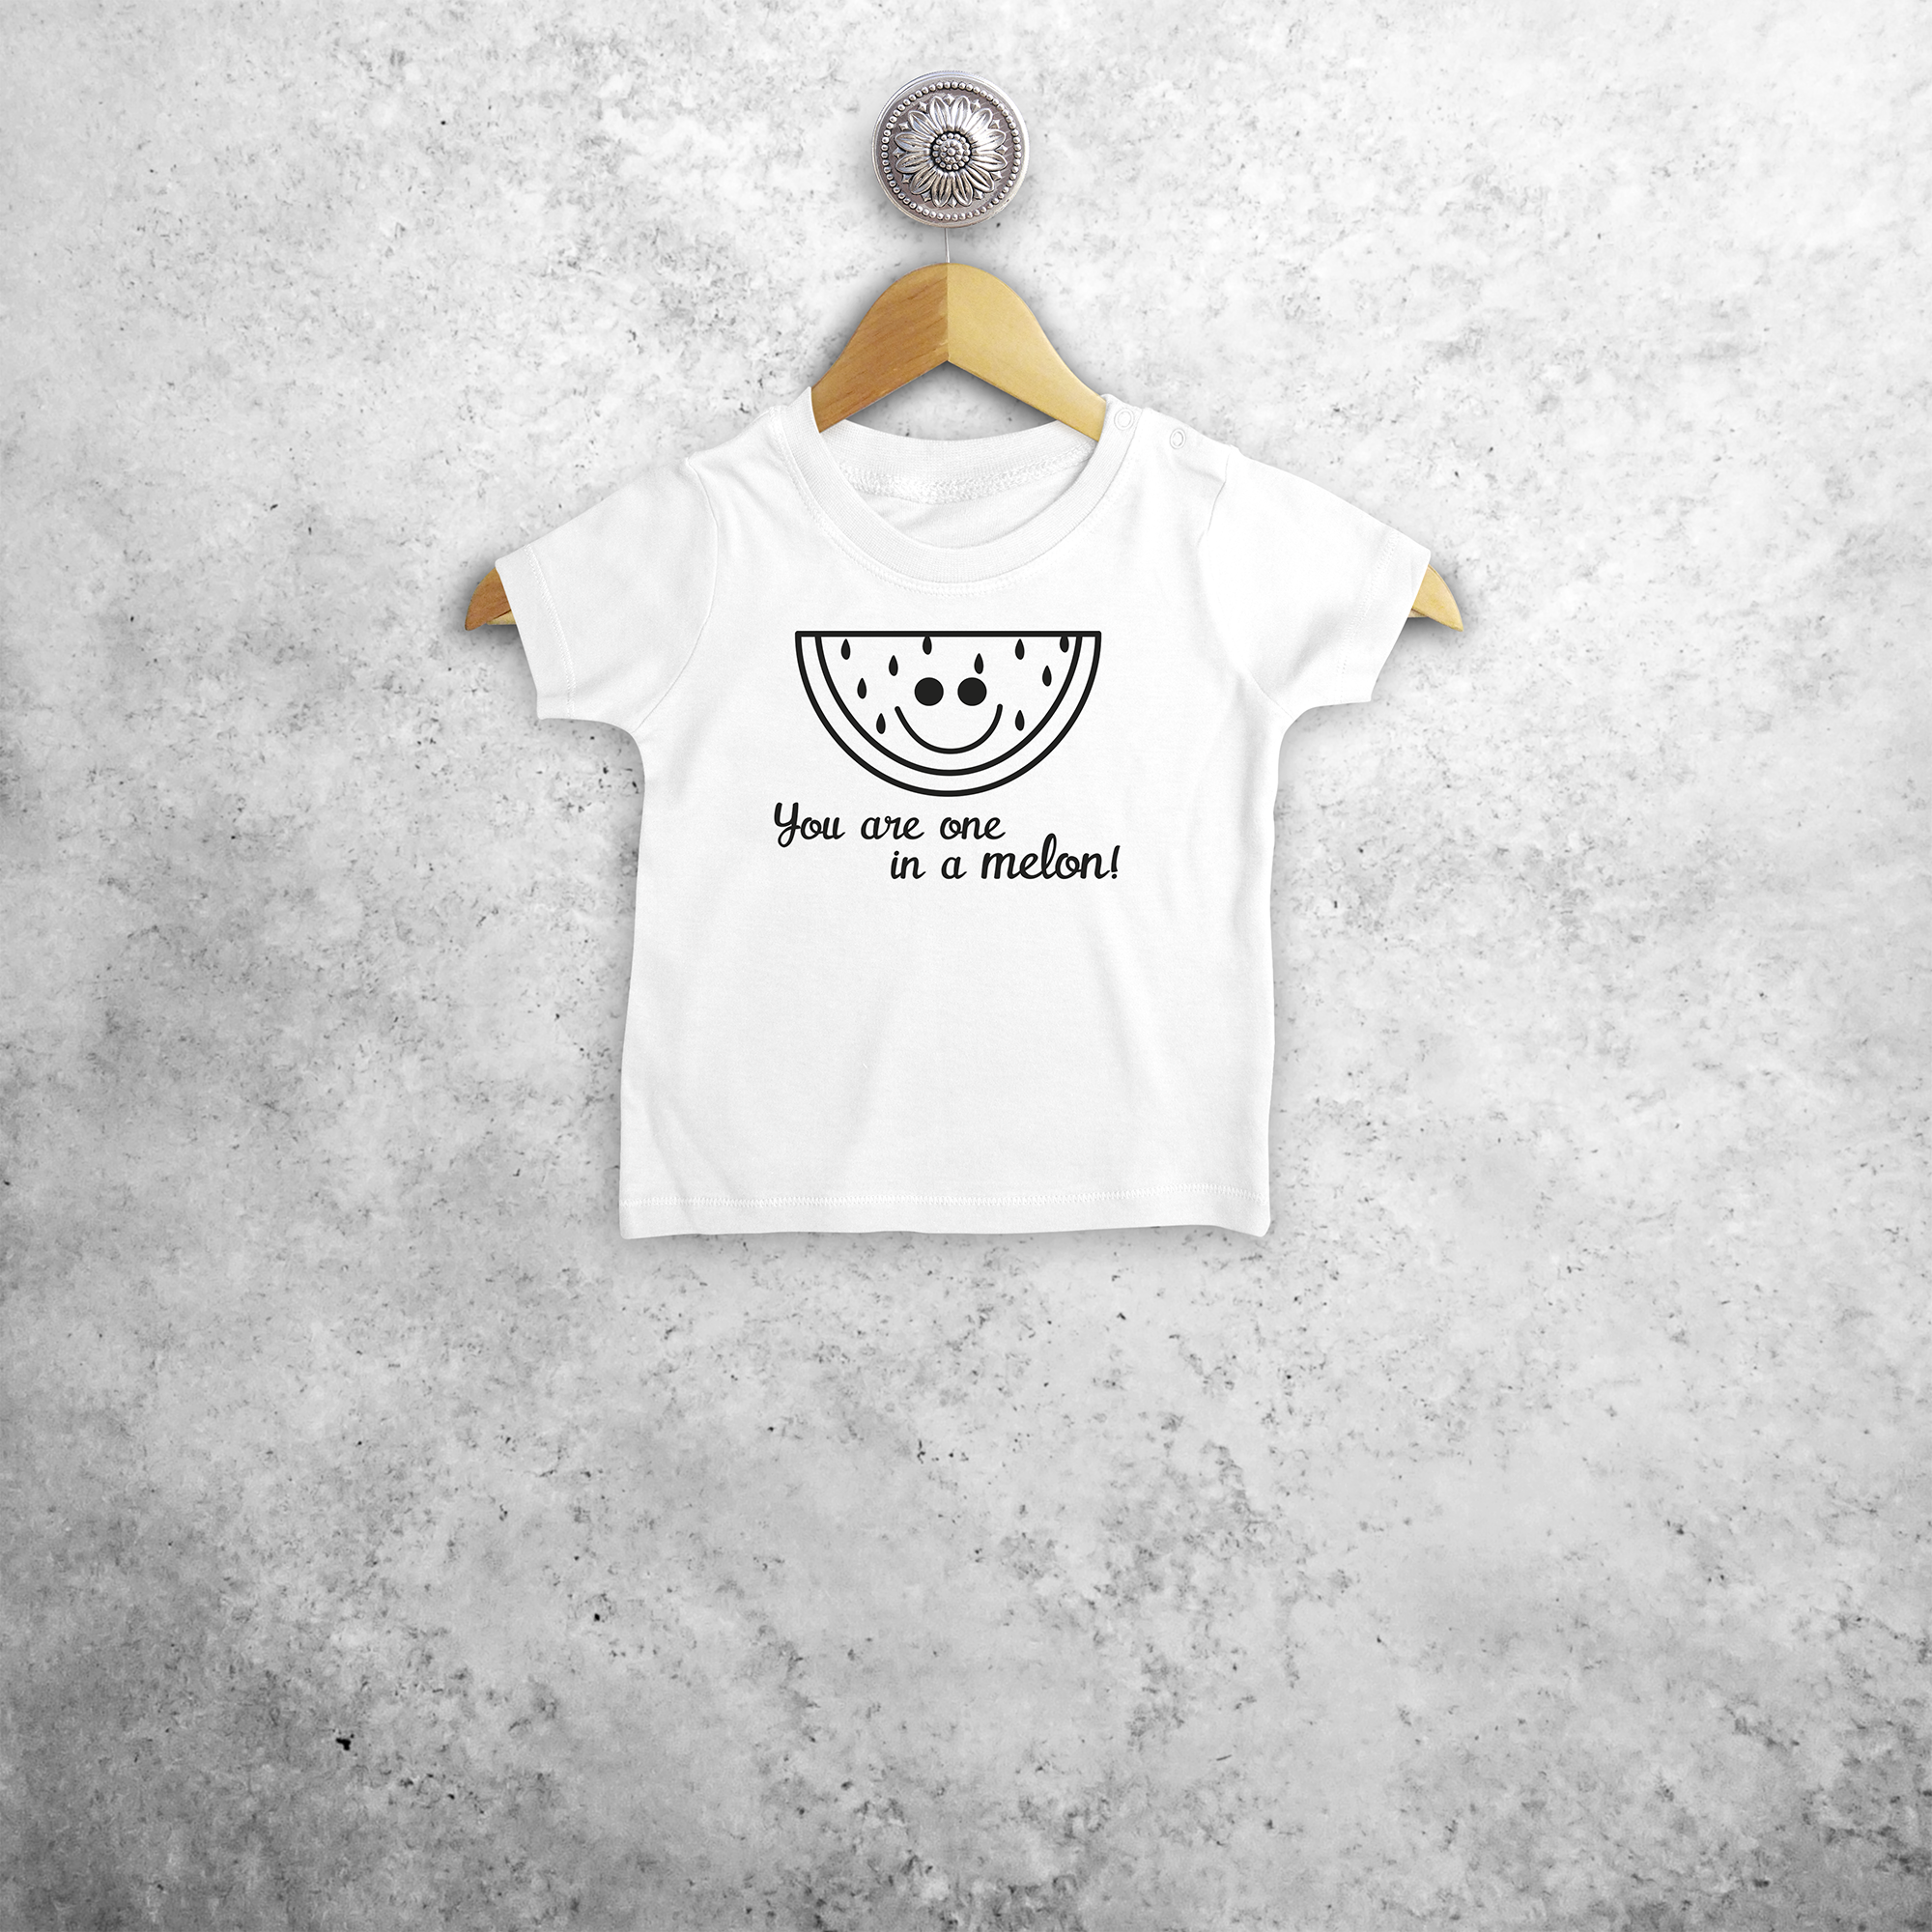 'You are one in a melon' baby shirt met korte mouwen